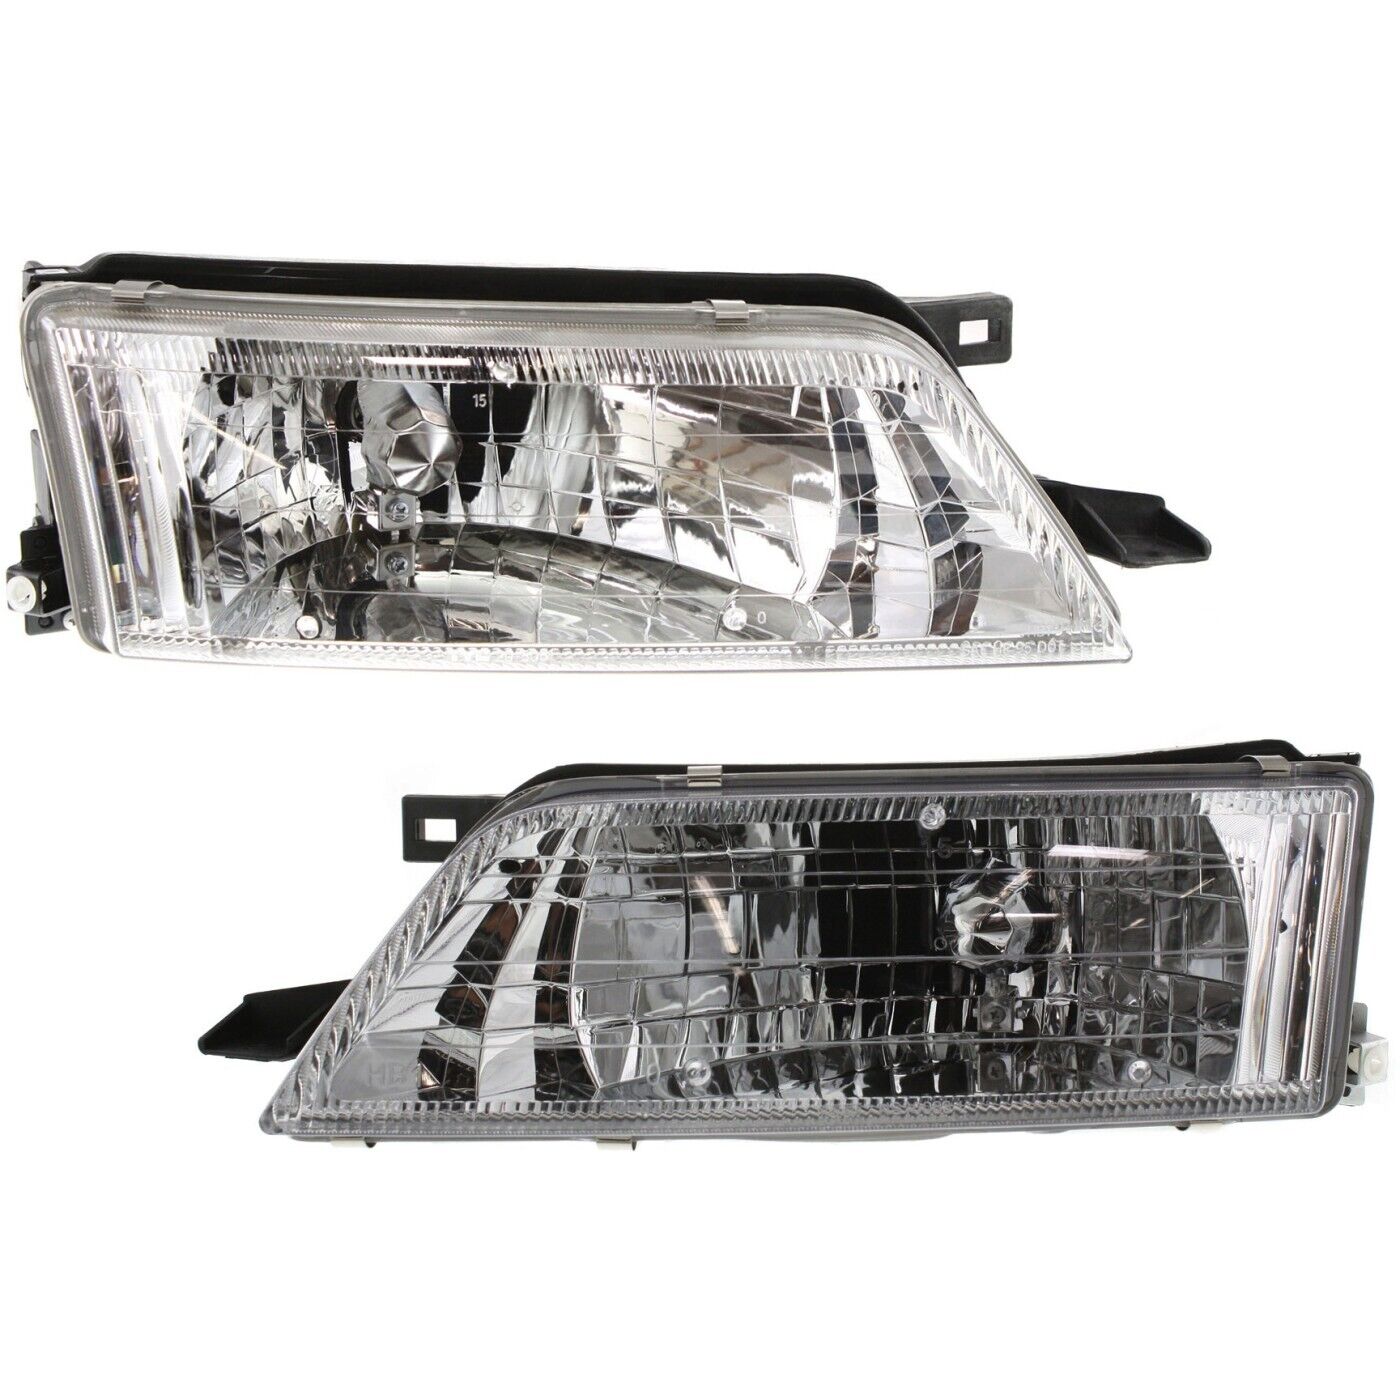 Headlight Set For 97 98 99 Nissan Maxima Left and Right With Bulb 2Pc